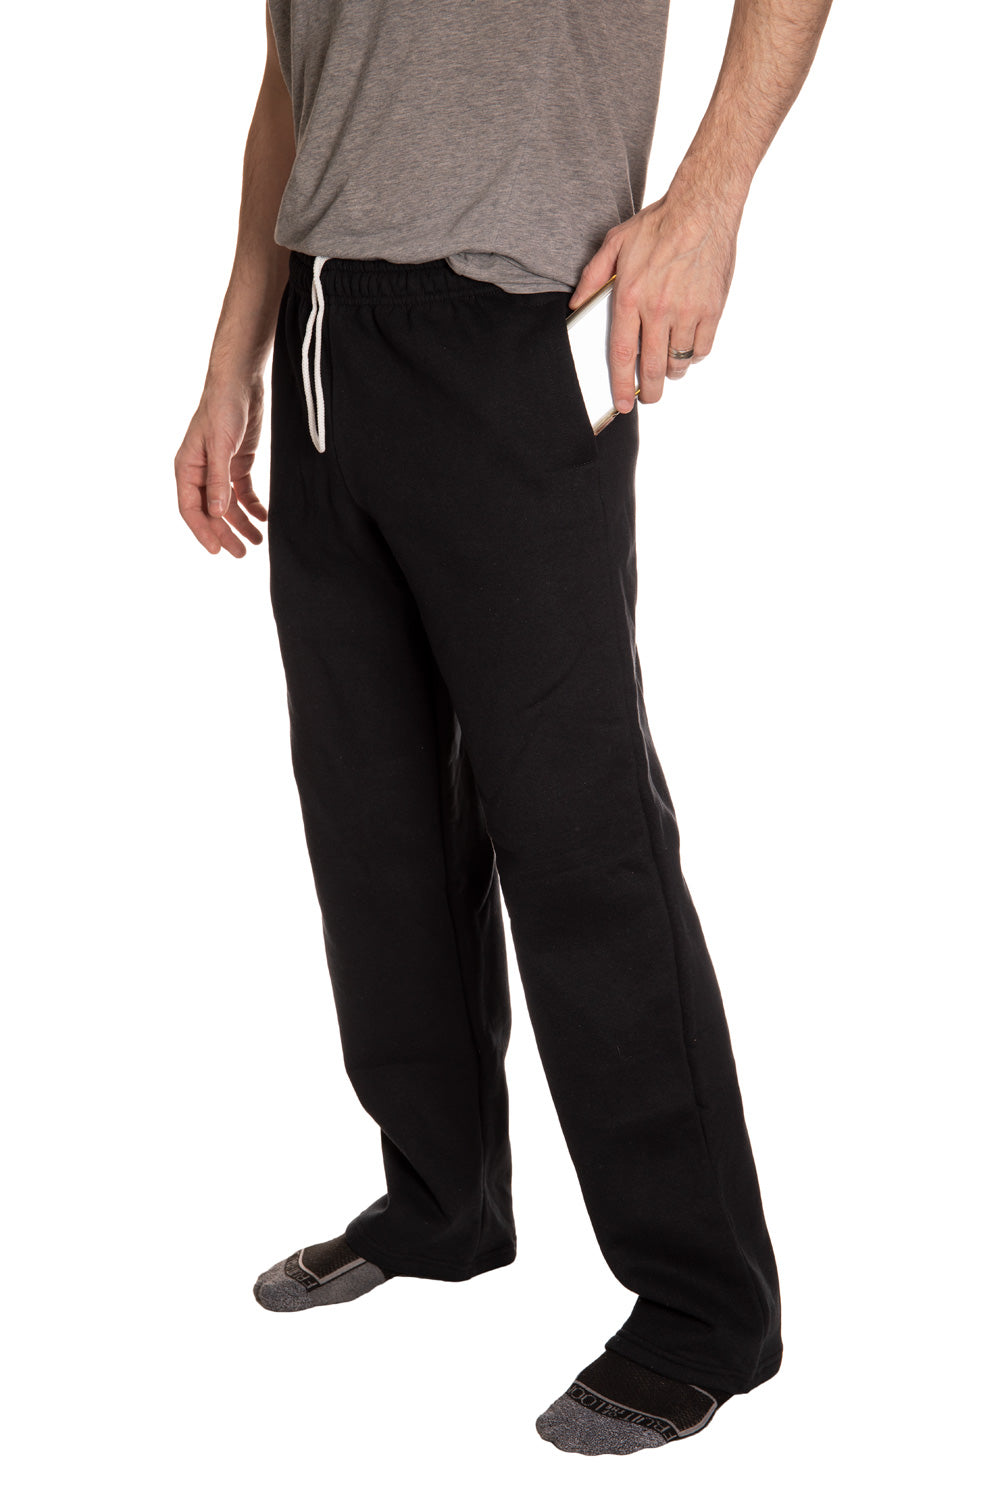 Anaheim Ducks Embroidered Logo Sweatpants Side View, Phone in Pocket.